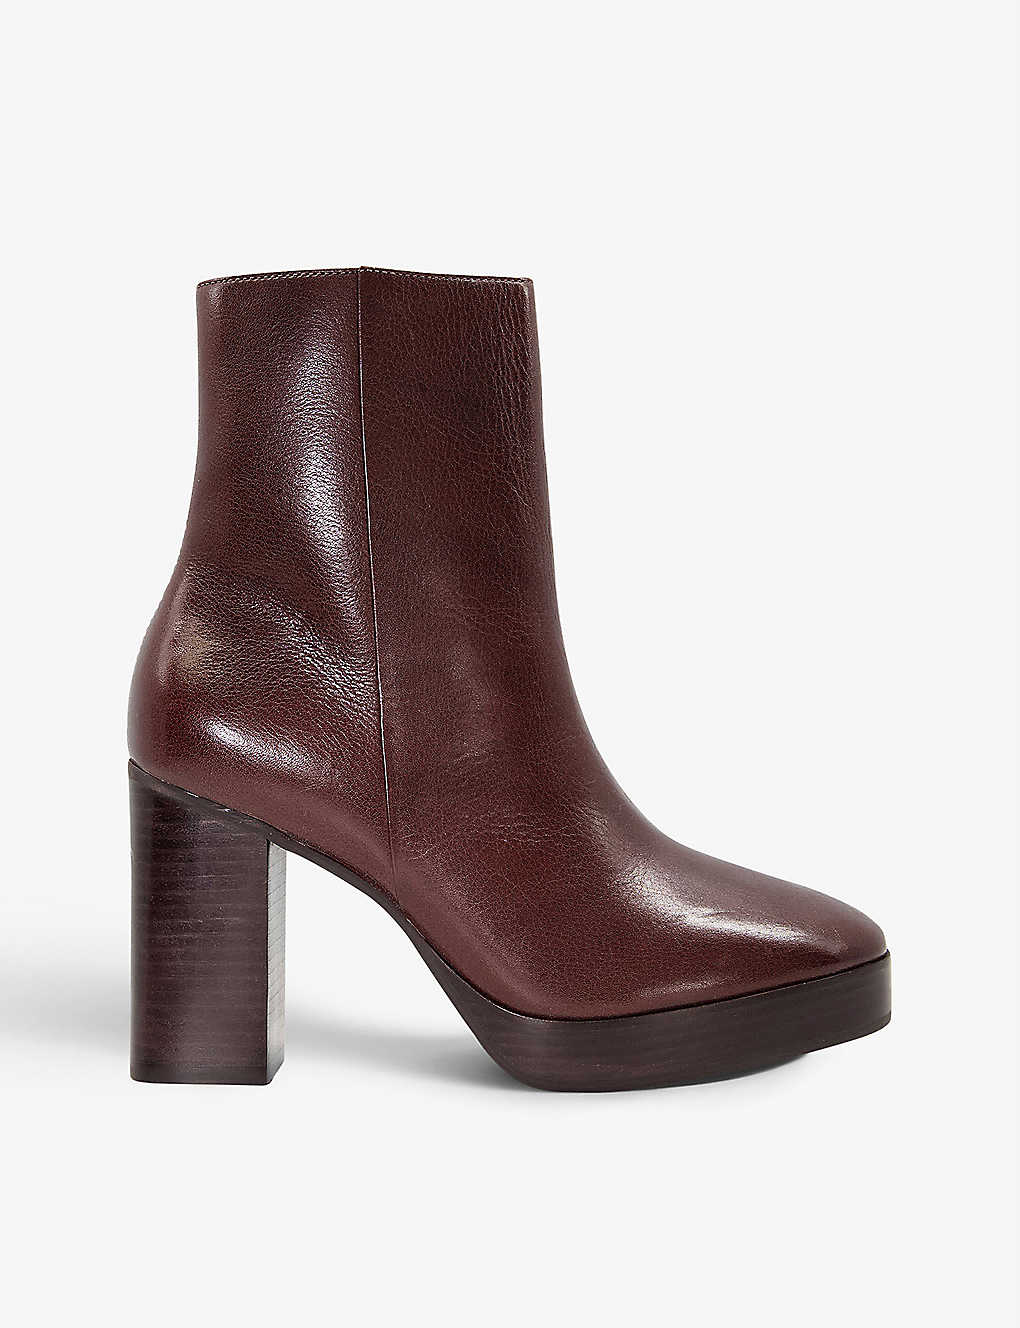 Dune Pella Heeled Platform Leather Ankle Boots In Dark Brown-leather